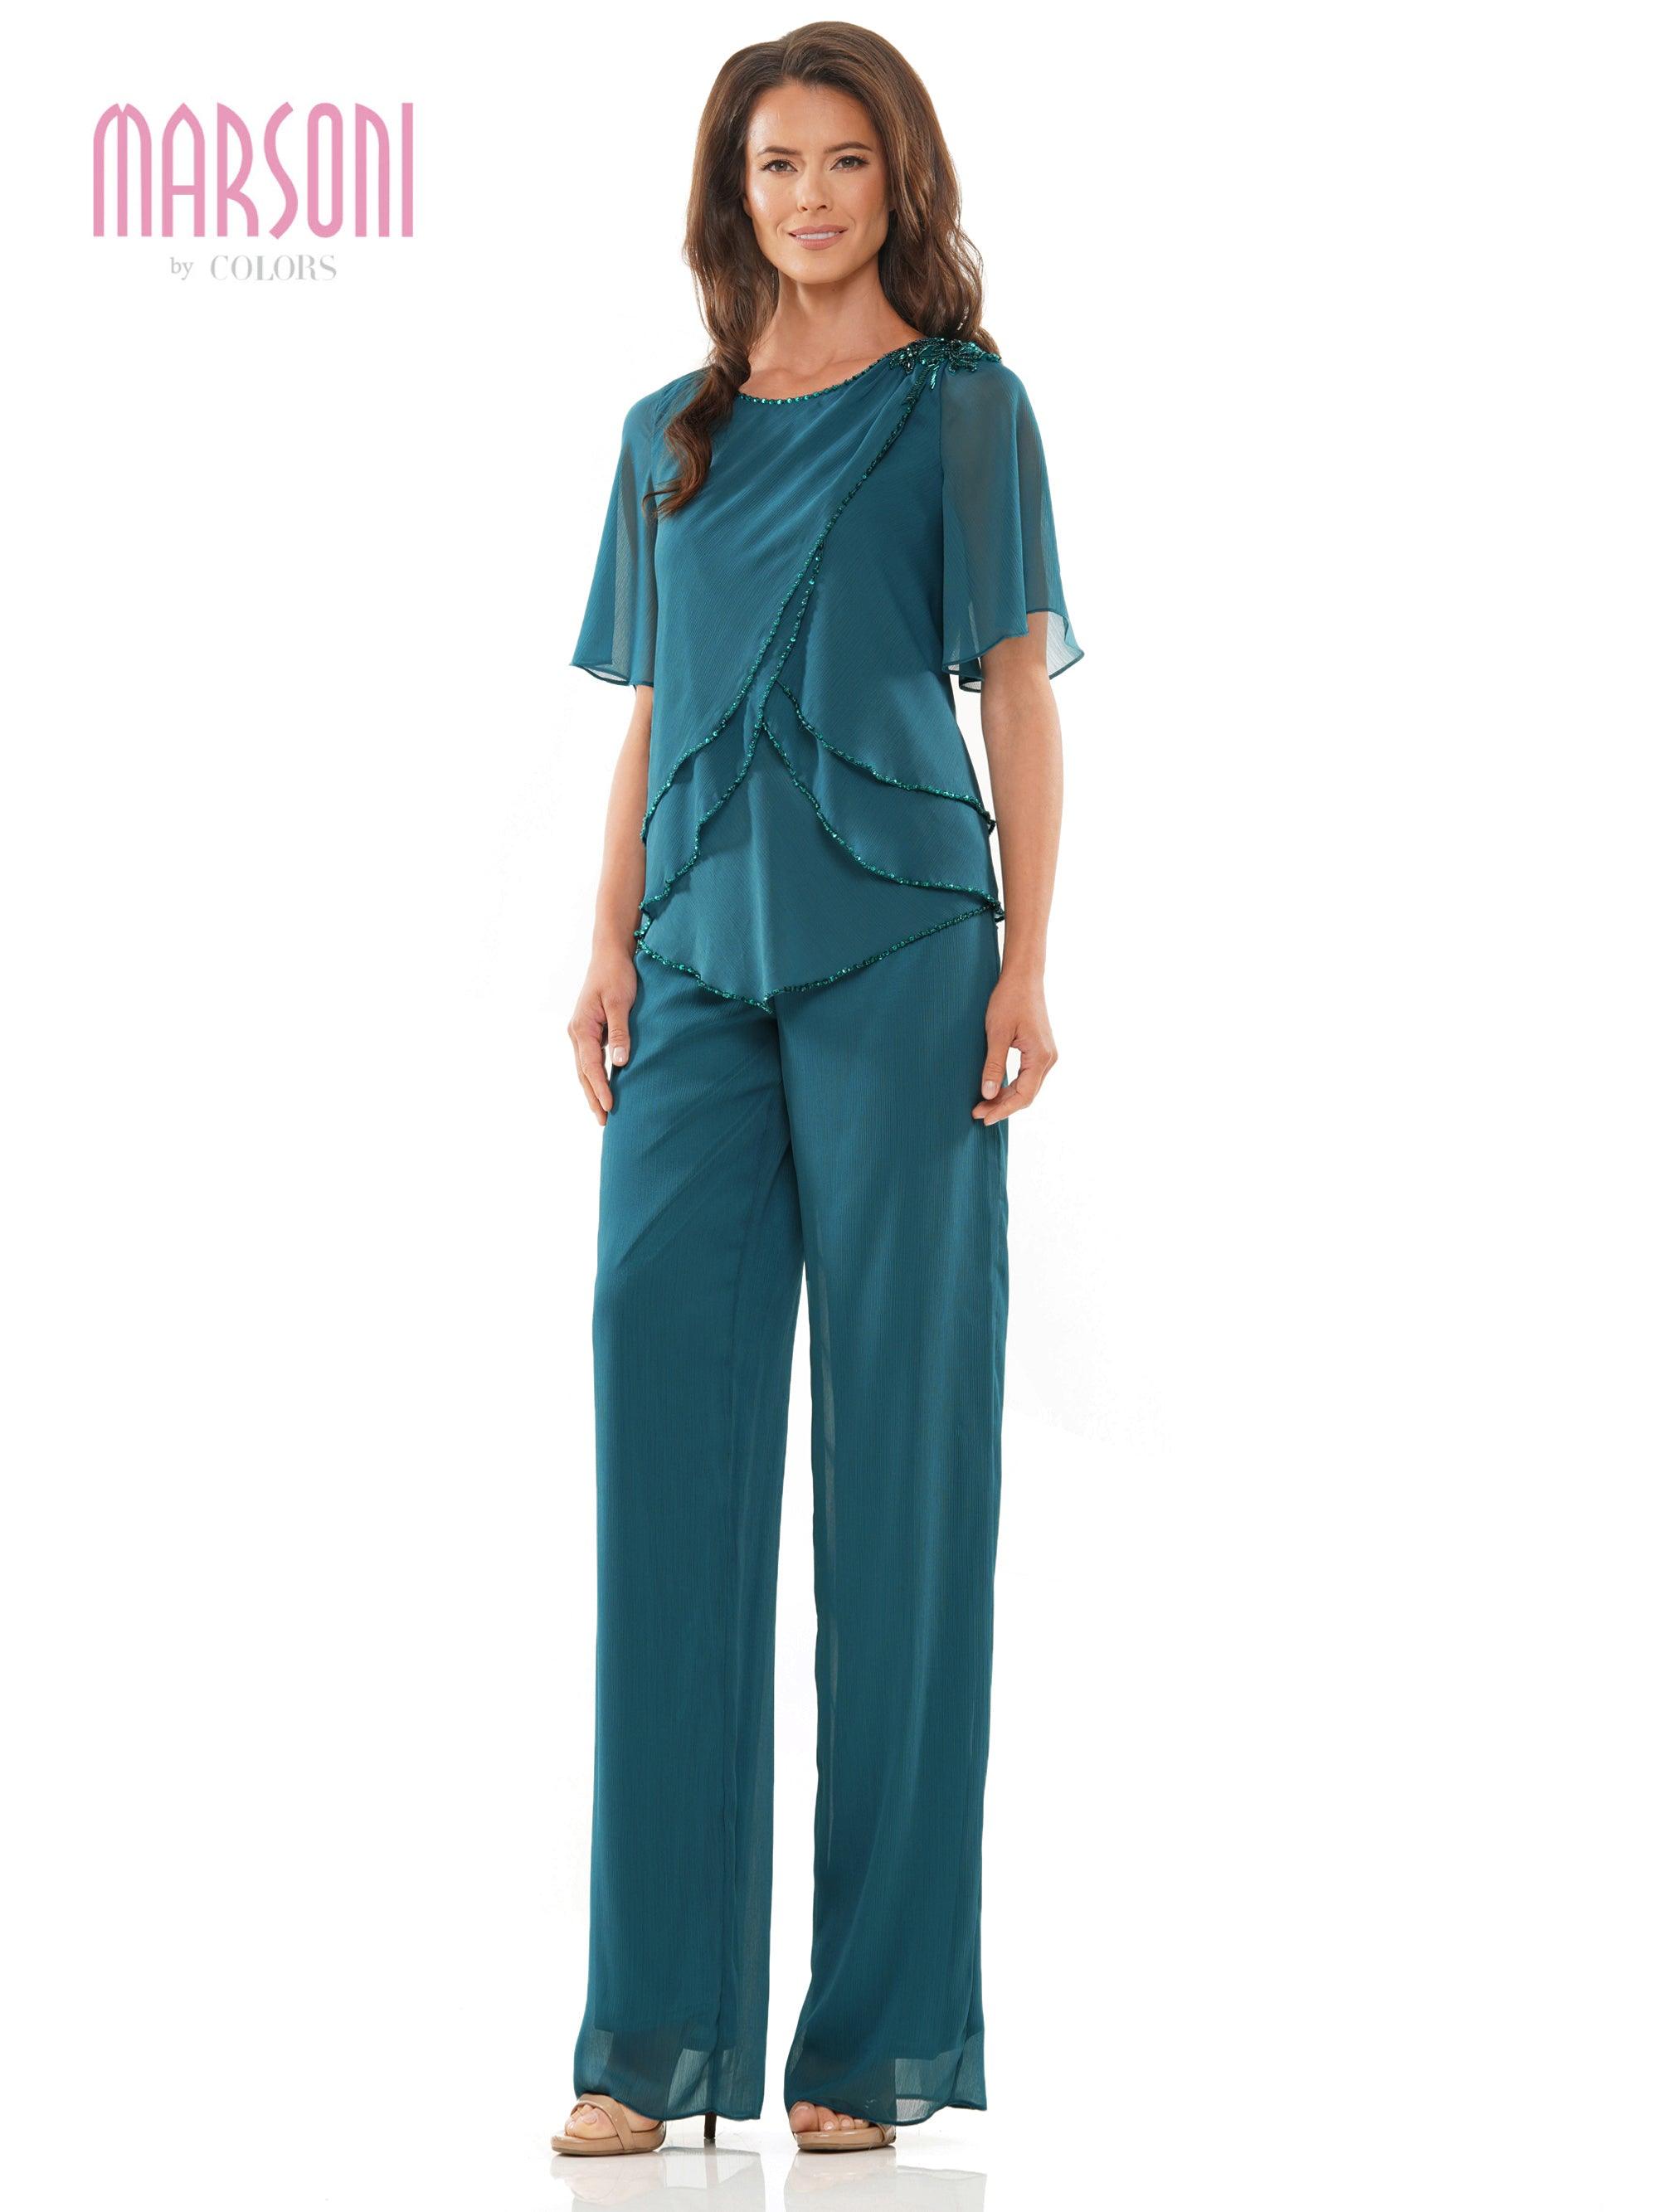 Black Marsoni Formal Mother of the Bride Pant Suit M321 for $327.99 ...